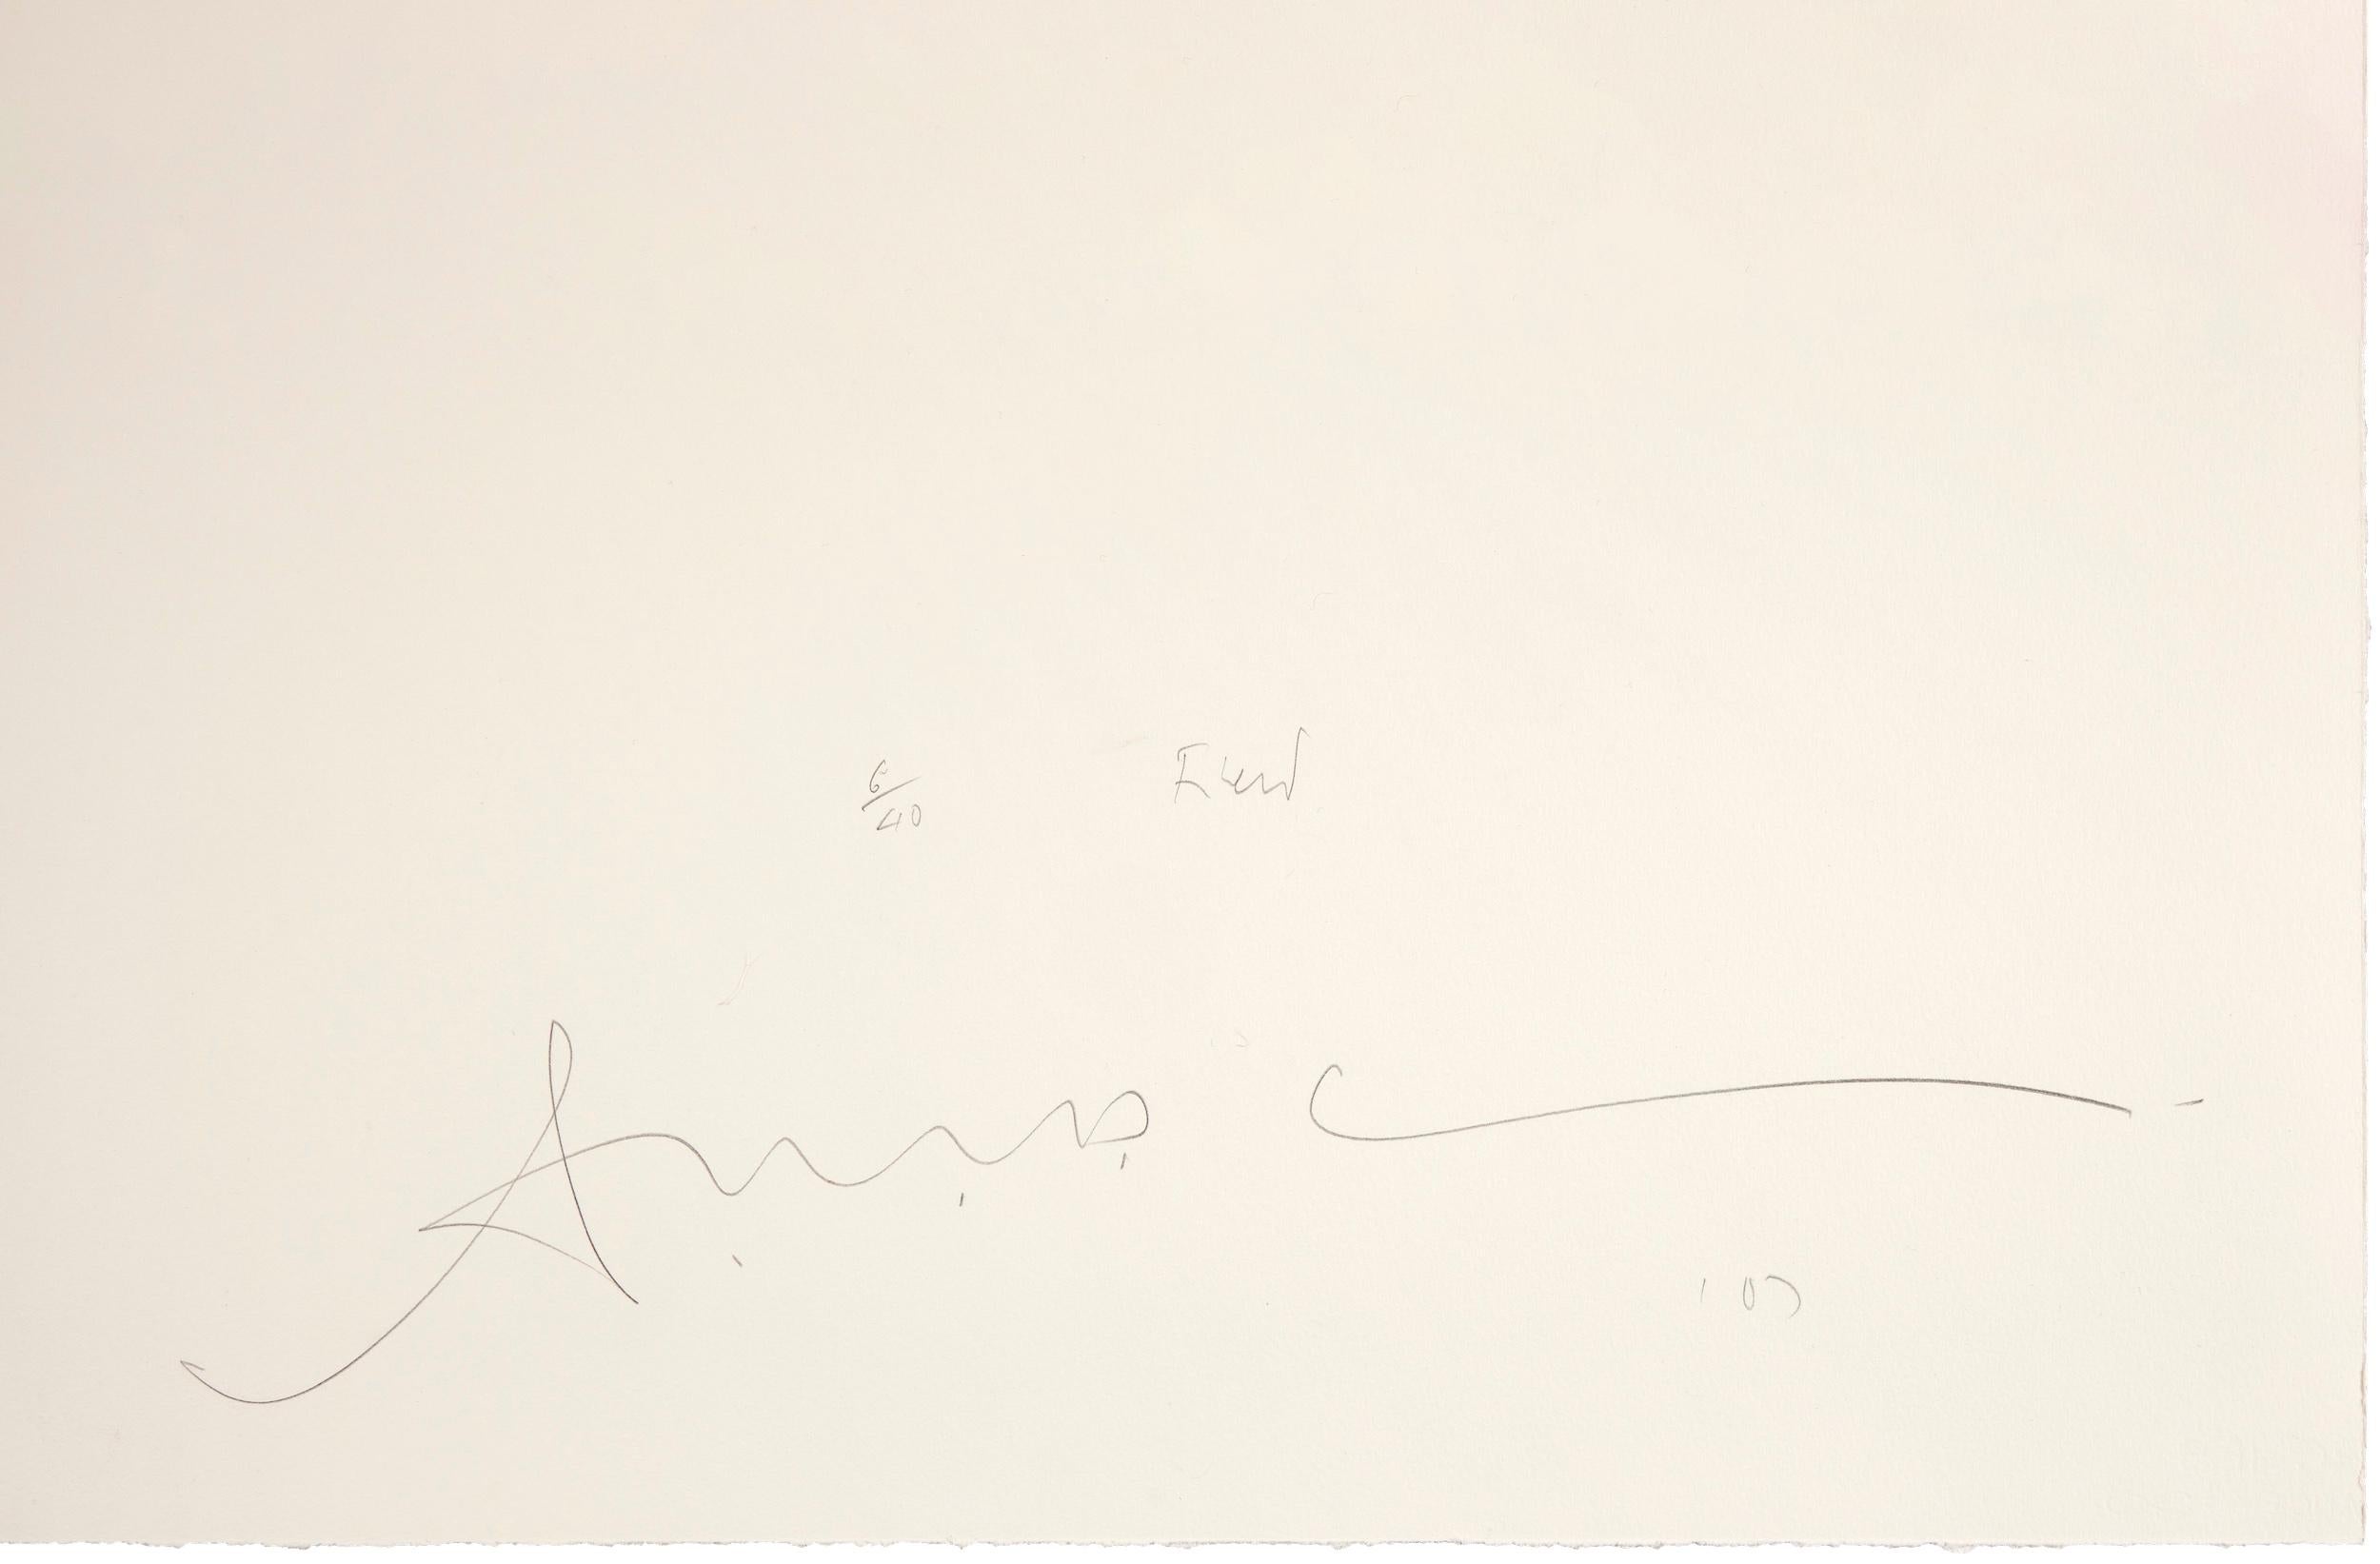 Field, 2007
Antony Gormley 

Lithograph, on 300g. Velin d’Arches paper
Signed and numbered from the edition of 40
Published by Edition Copenhagen, Copenhagen
Sheet: 79 × 116.5 cm (31.1 × 45.7 in)